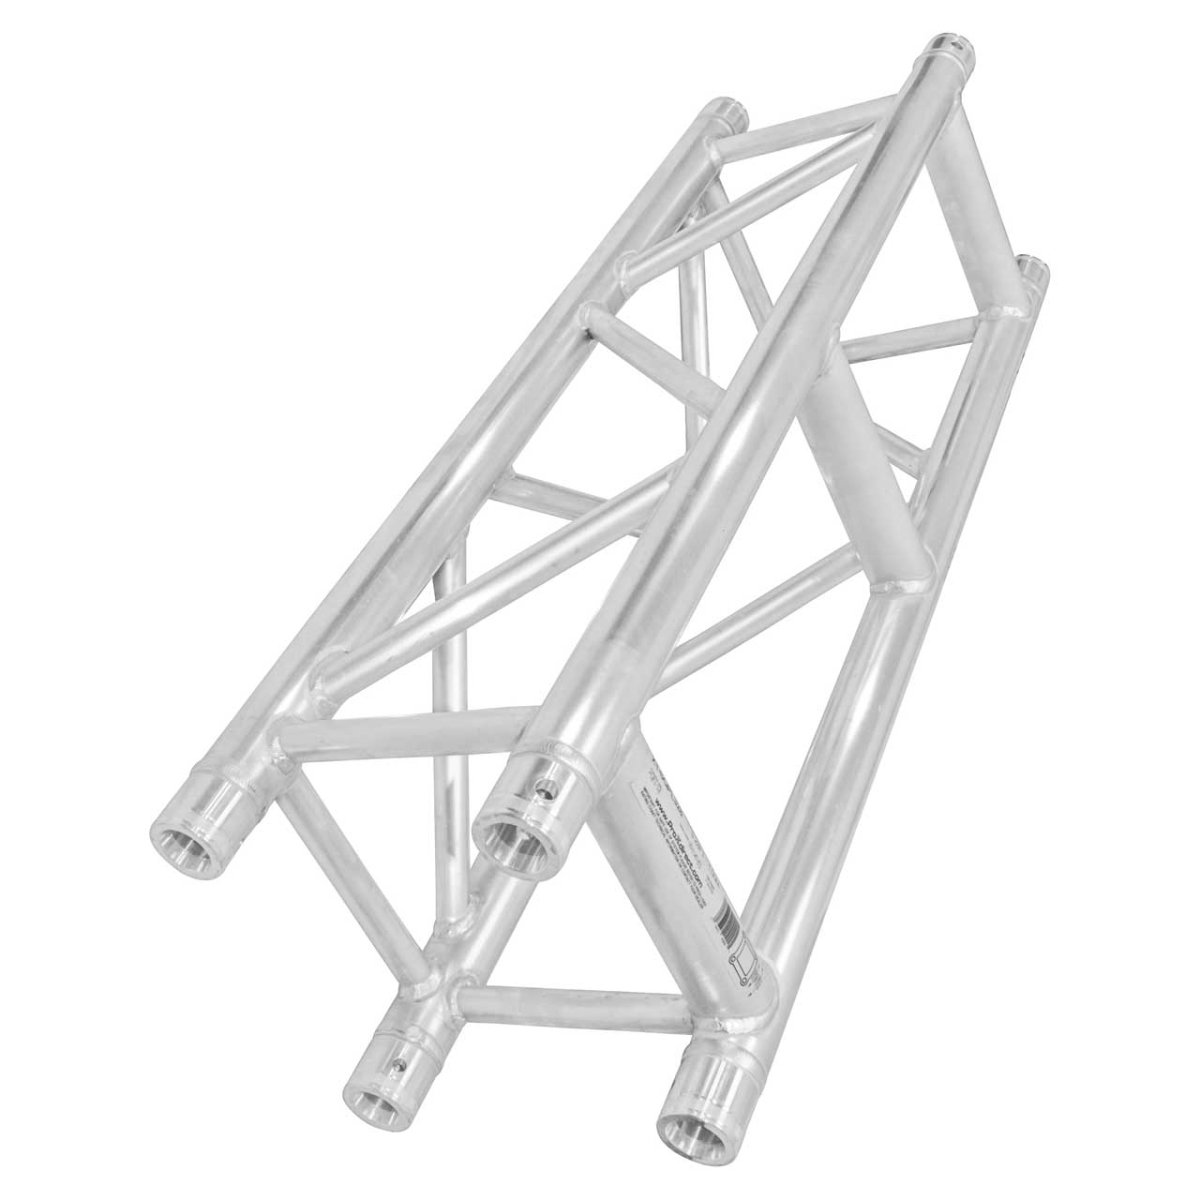 Picture of ProX Live Performance Gear PXG-XT-SQPL328 3.28 ft. F34 Professional Ladder Truss Segment with 3 mm Tubing